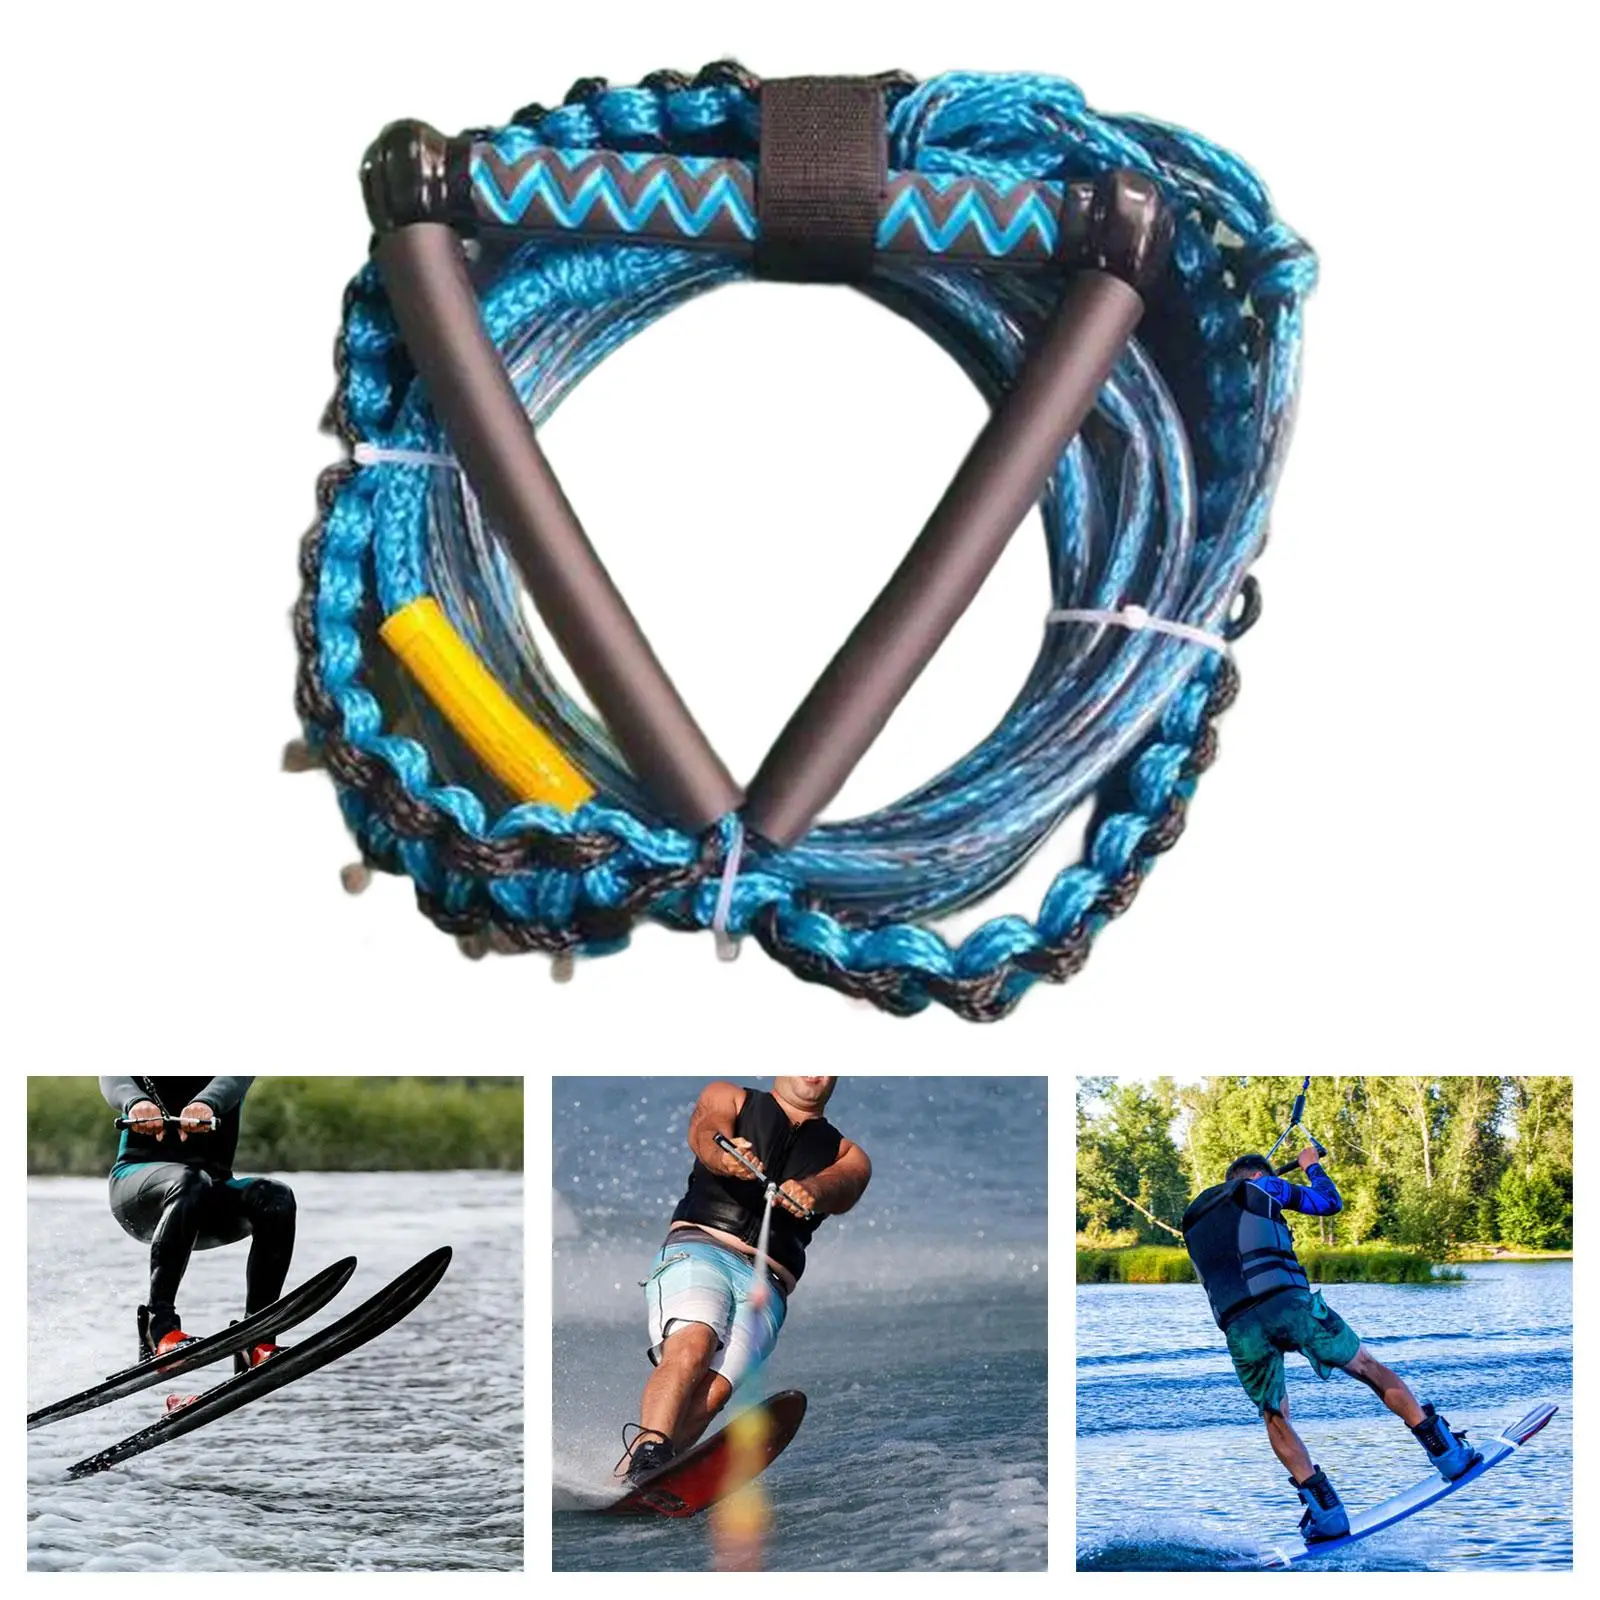 

Water Ski Rope Portable with Handle Lightweight Wake Surf Rope Wakeboard Rope for Water Sports Kneeboard Wakeboard Surfing